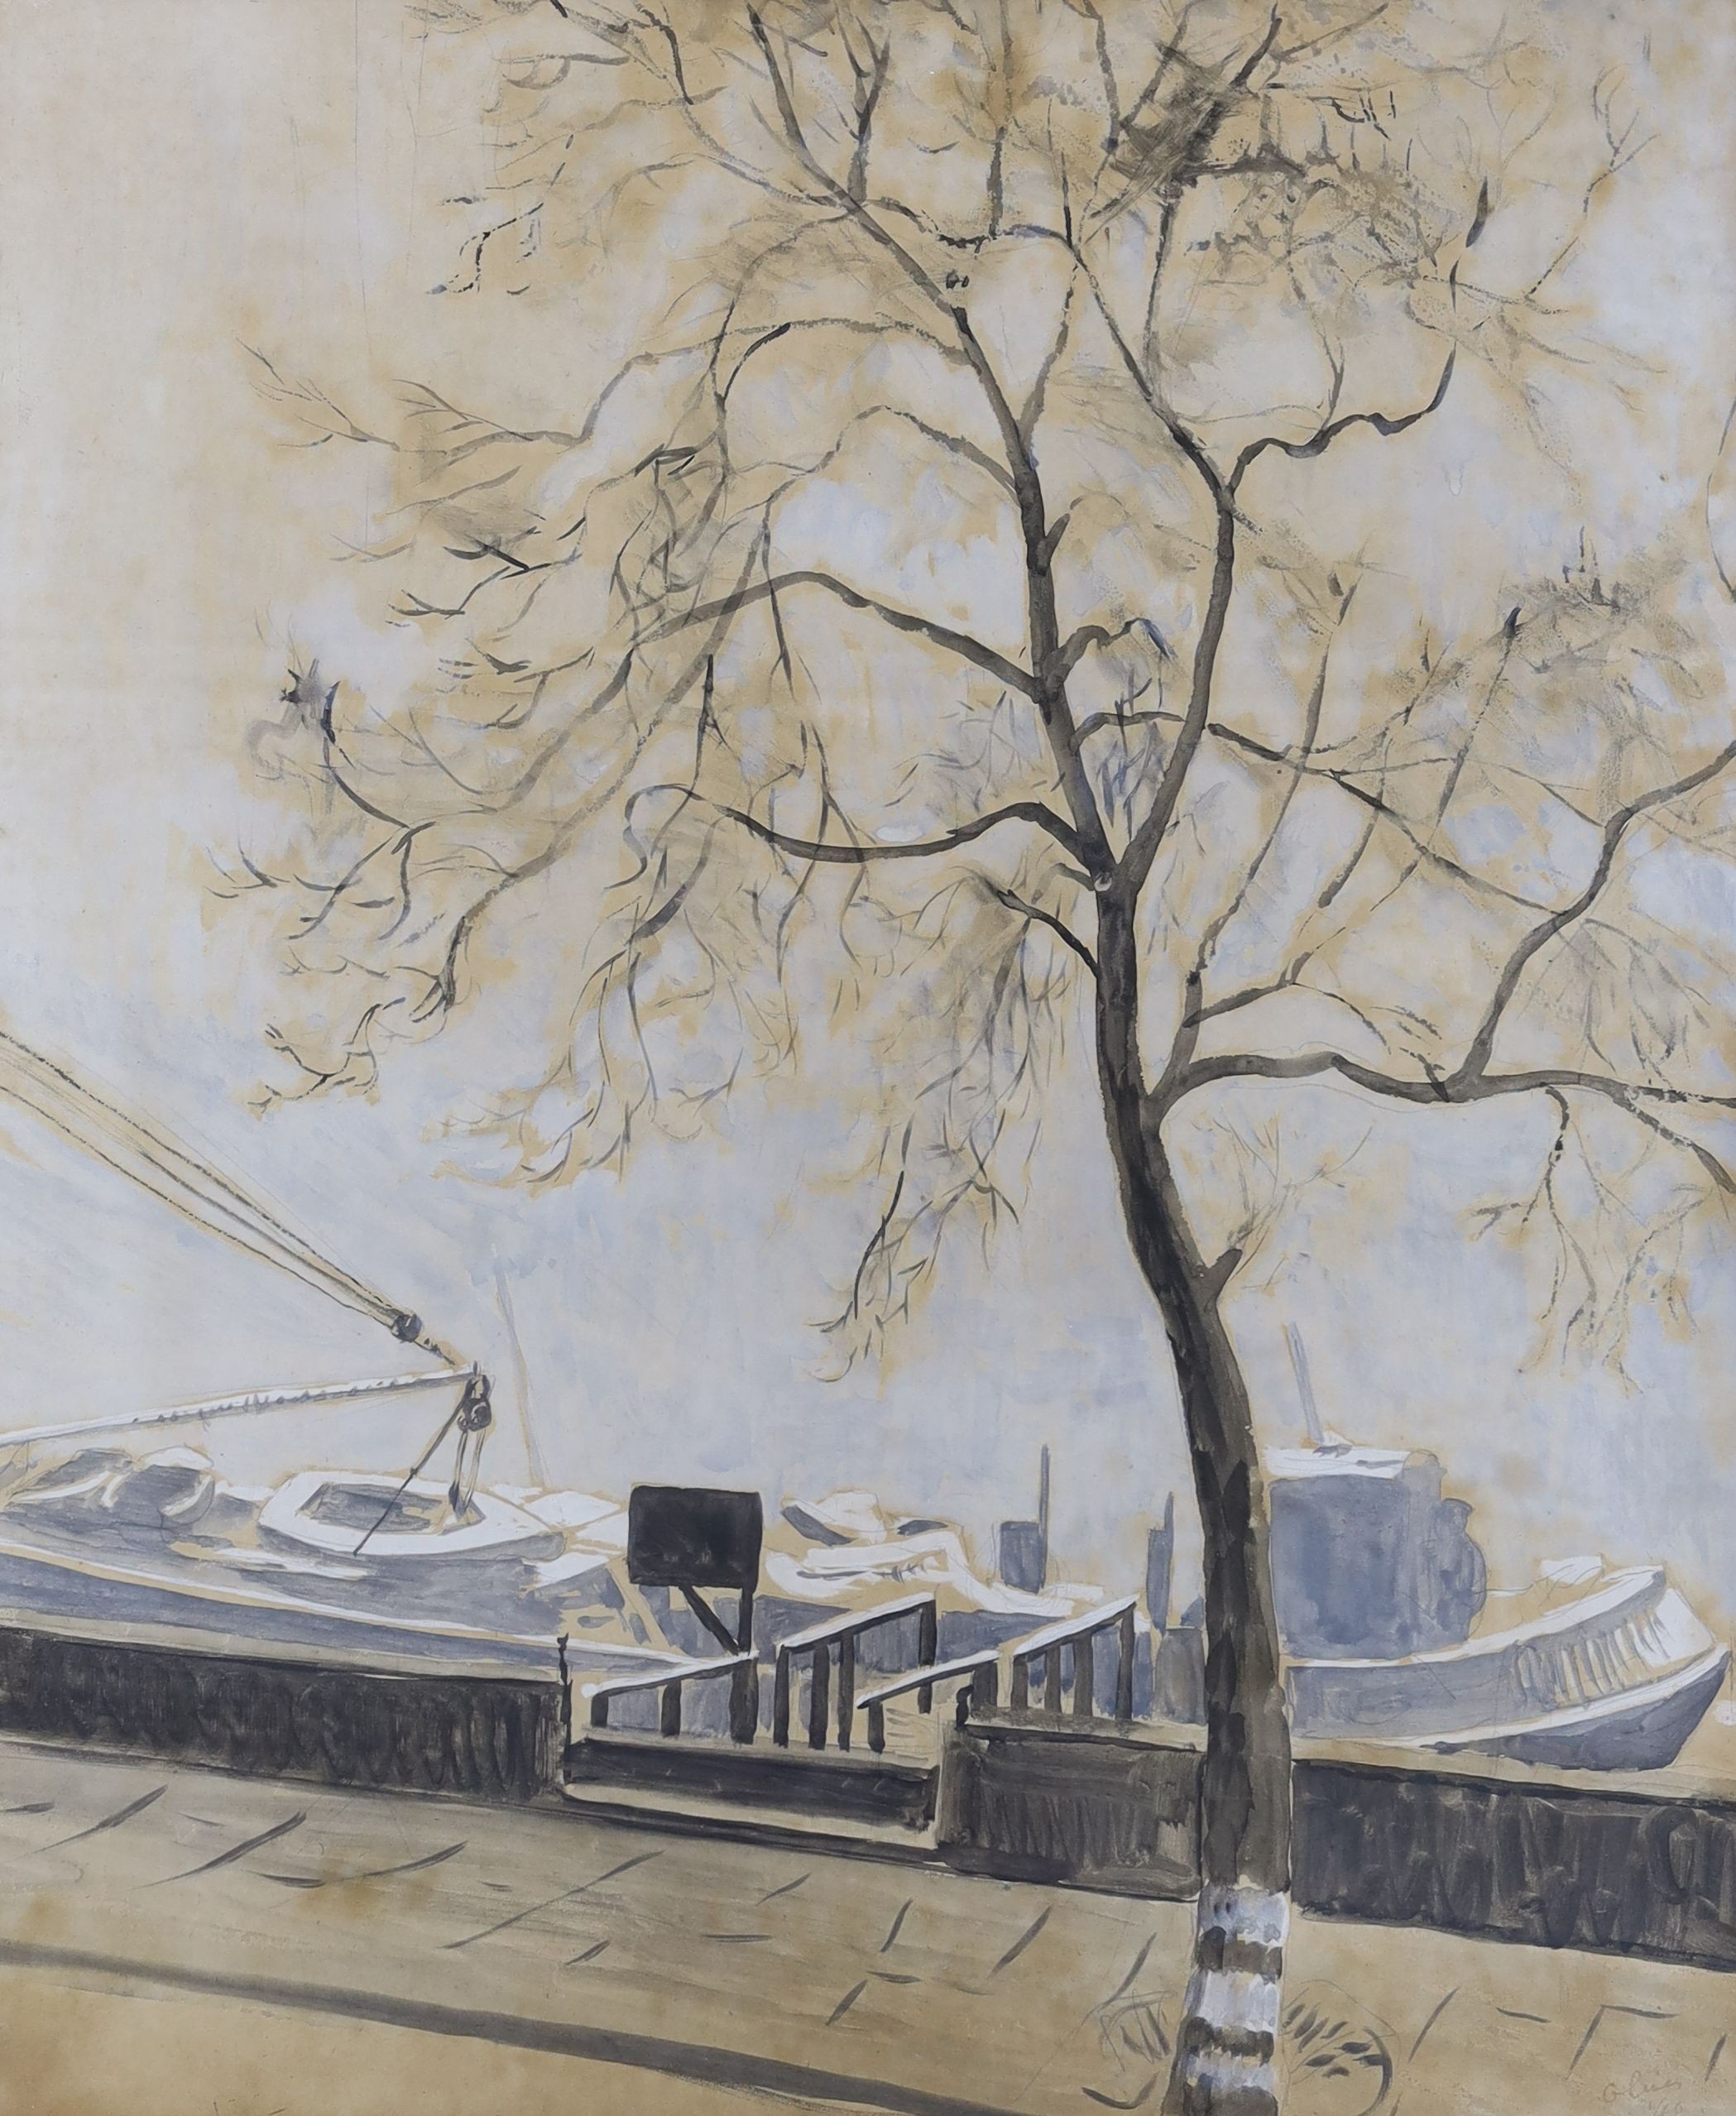 Margery Oliver (fl.1938-40), watercolour, 'River mist', signed, 1940 Leicester Galleries Exhibition label verso, 63 x 53cm